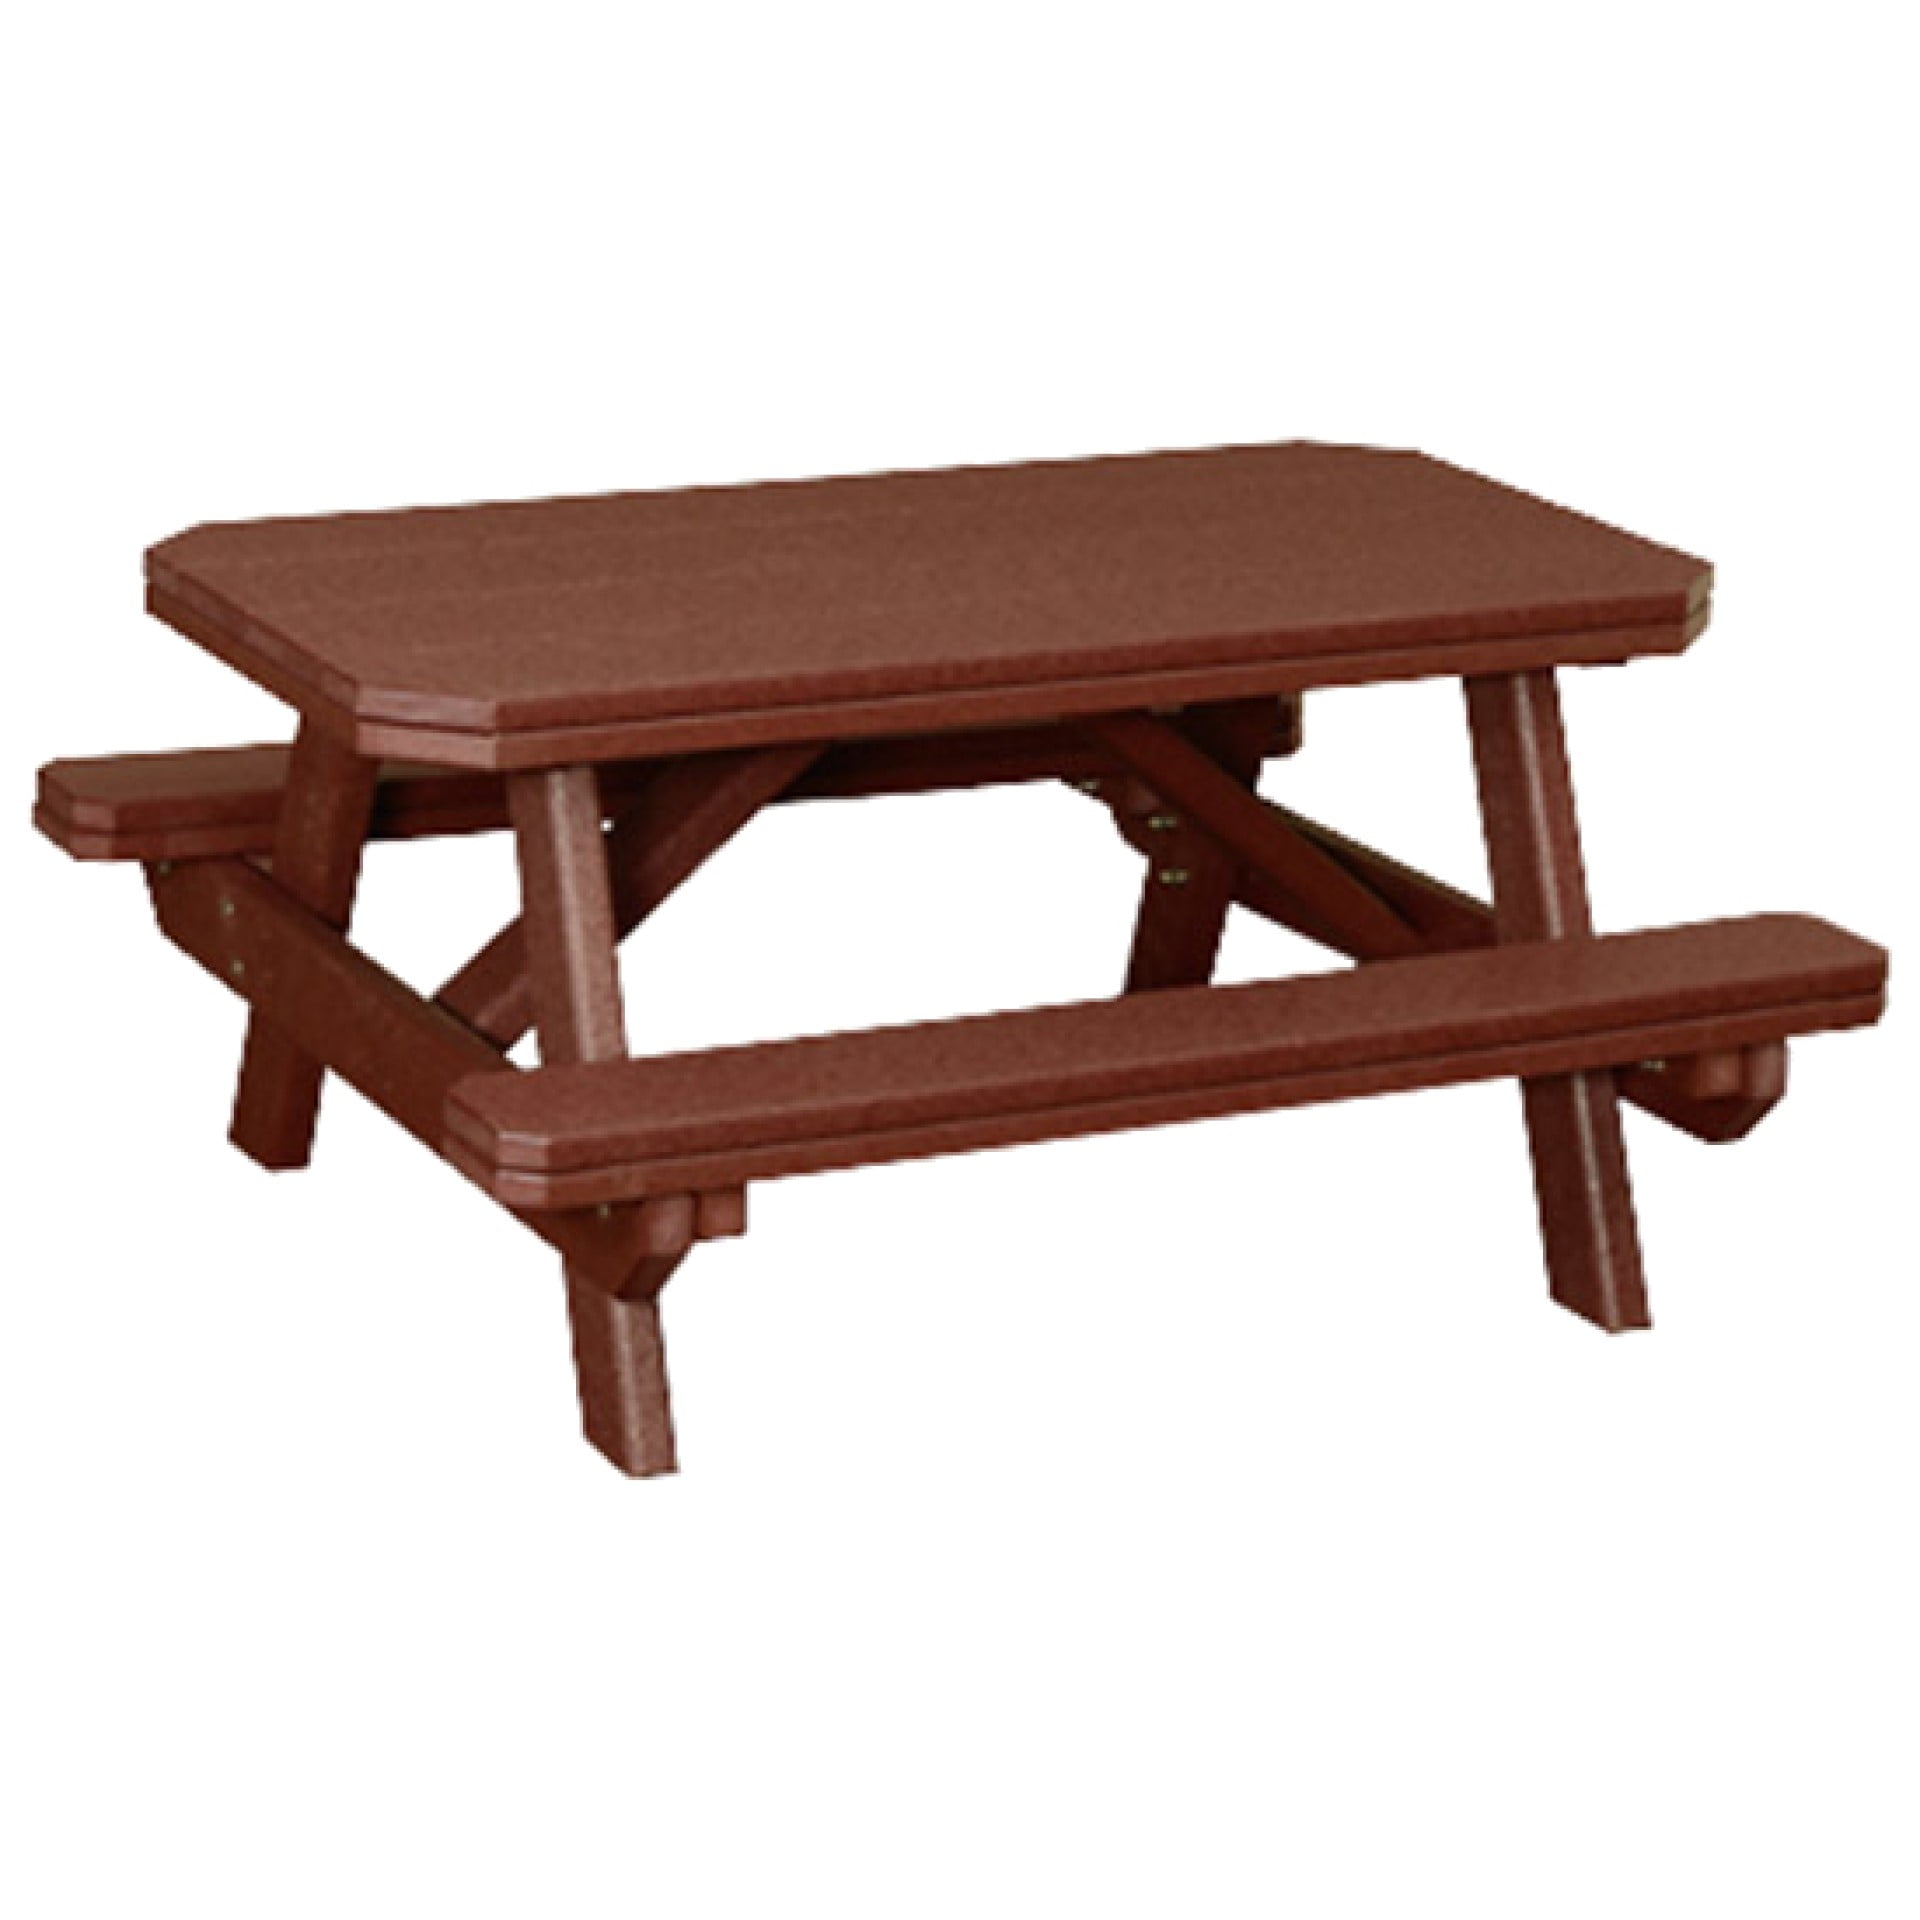 Finch Child’s Table with Benches